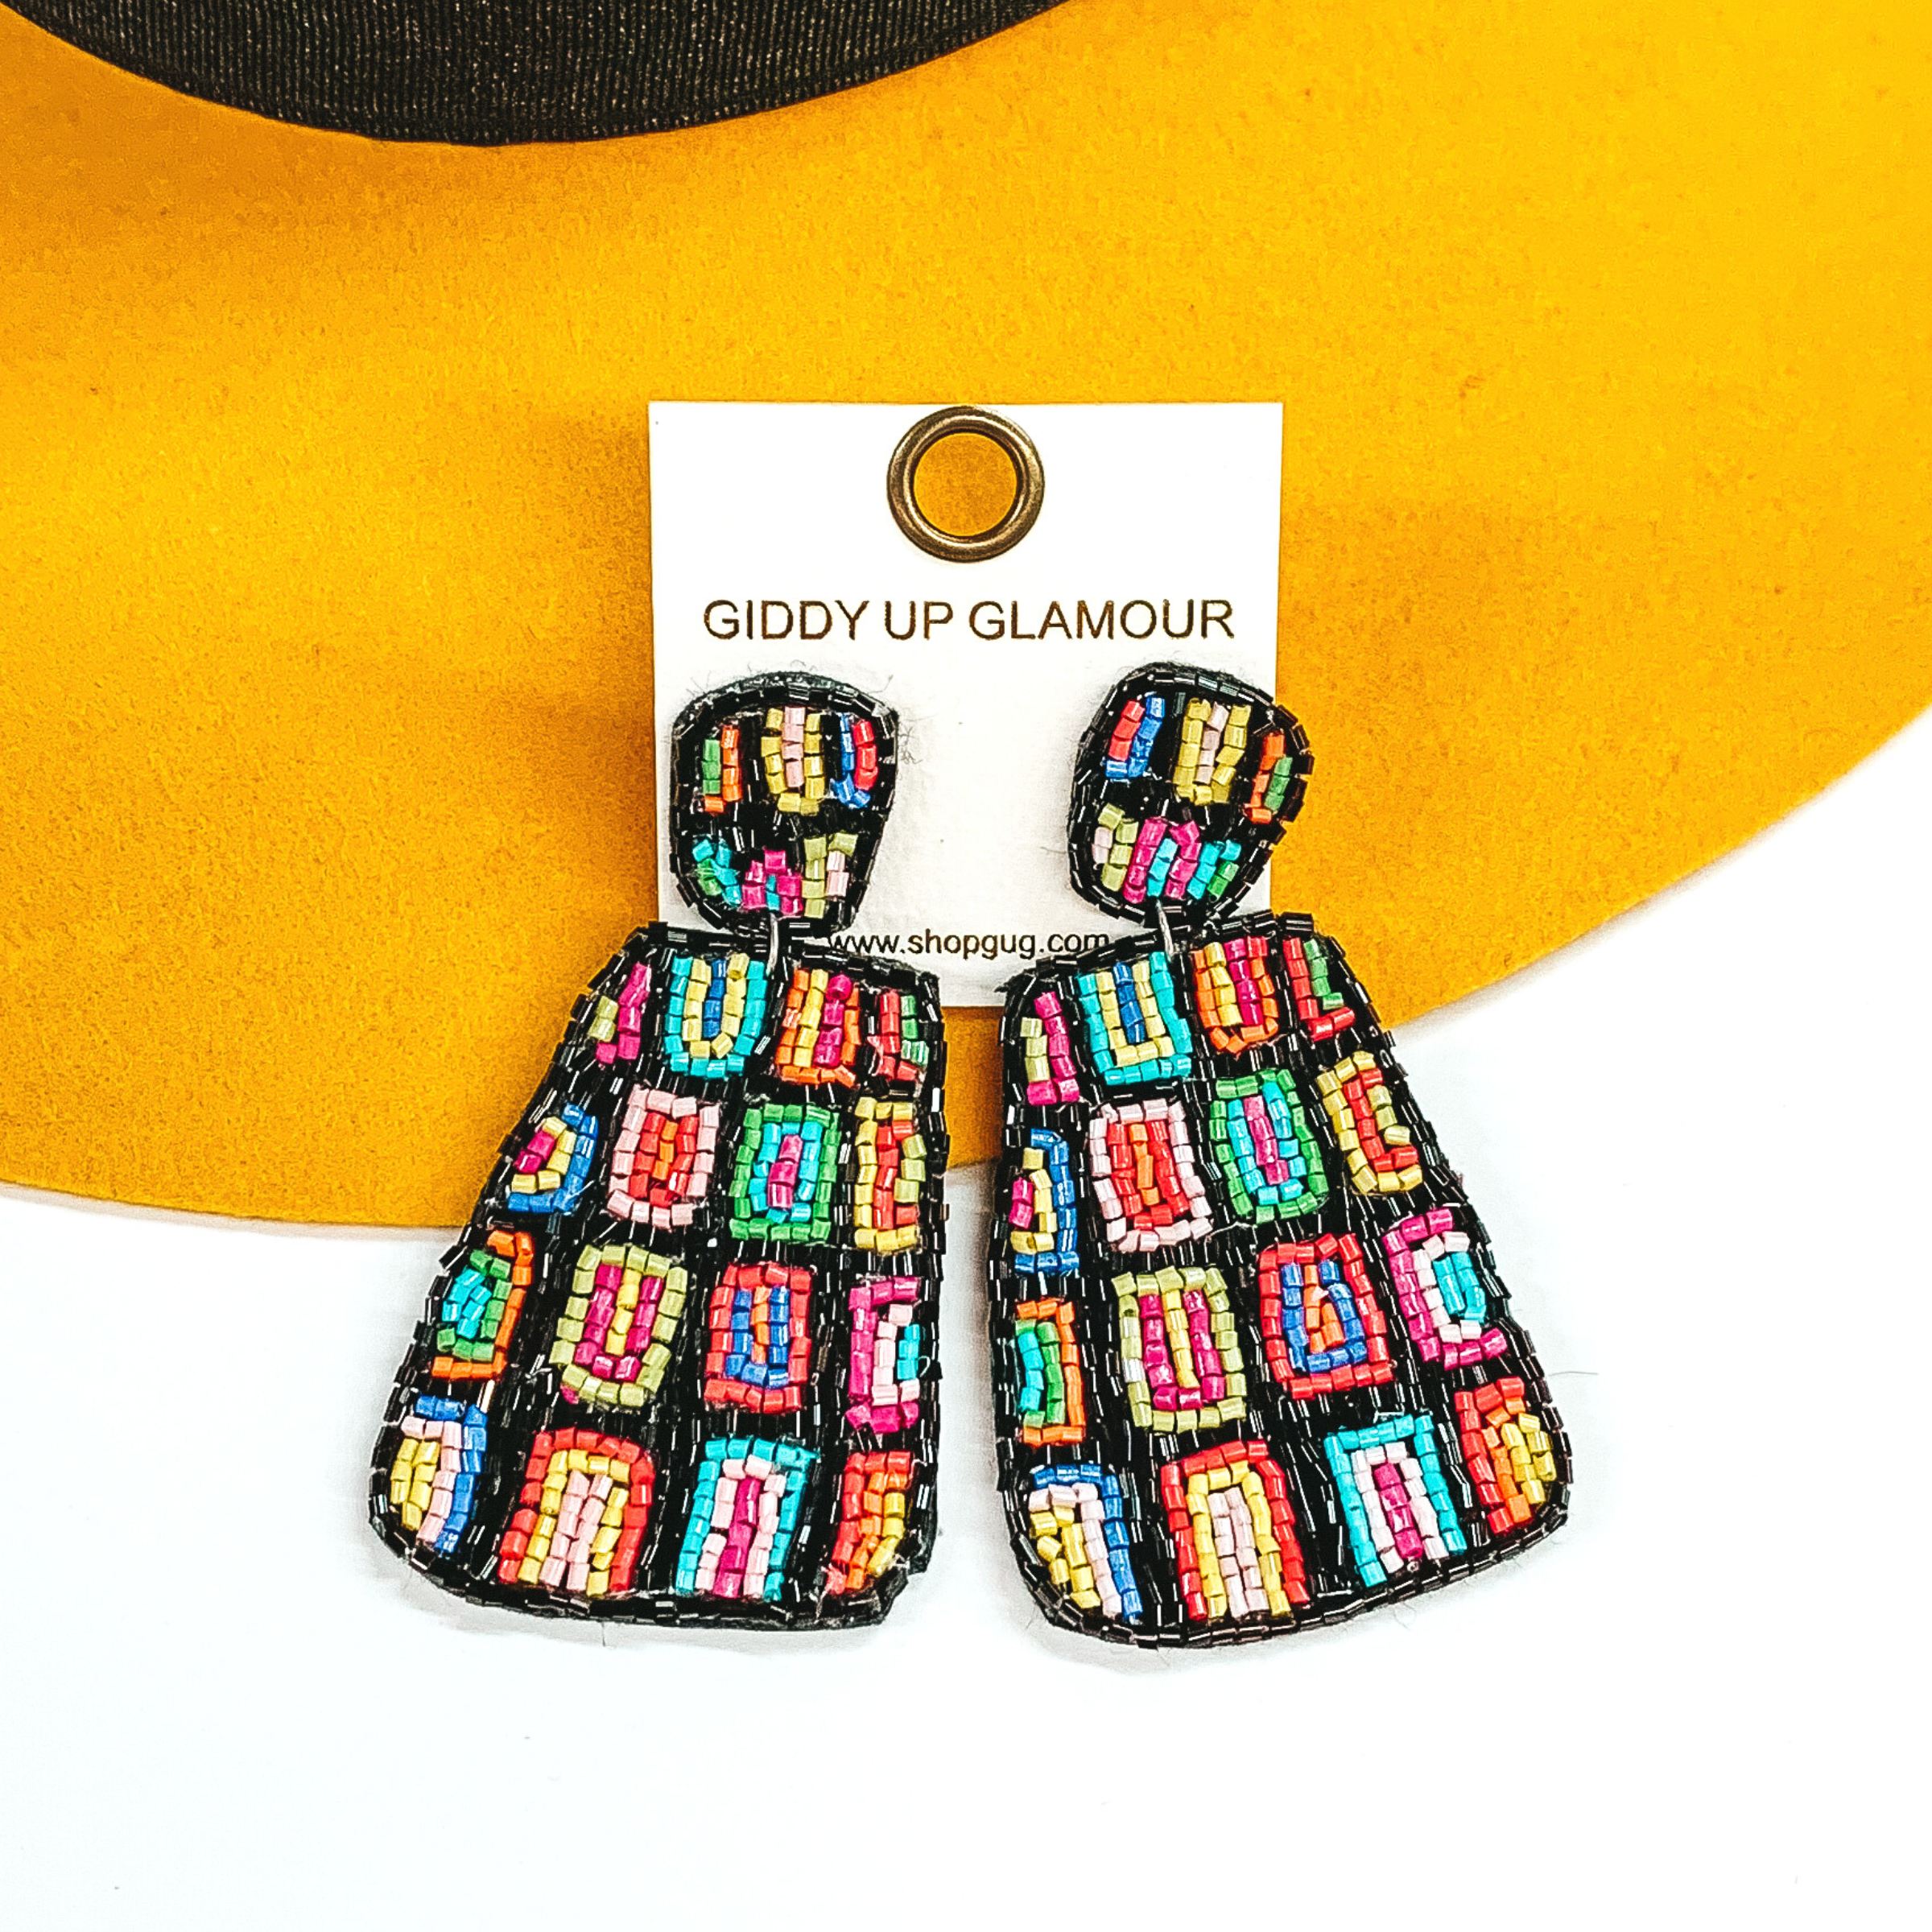 Irregular square shapes studs with an irregular shaped rectangle hanging pendant. Both has a black beaded background with multicolored rectangles throughout. These earrings are pictured on a white and yellow background. 